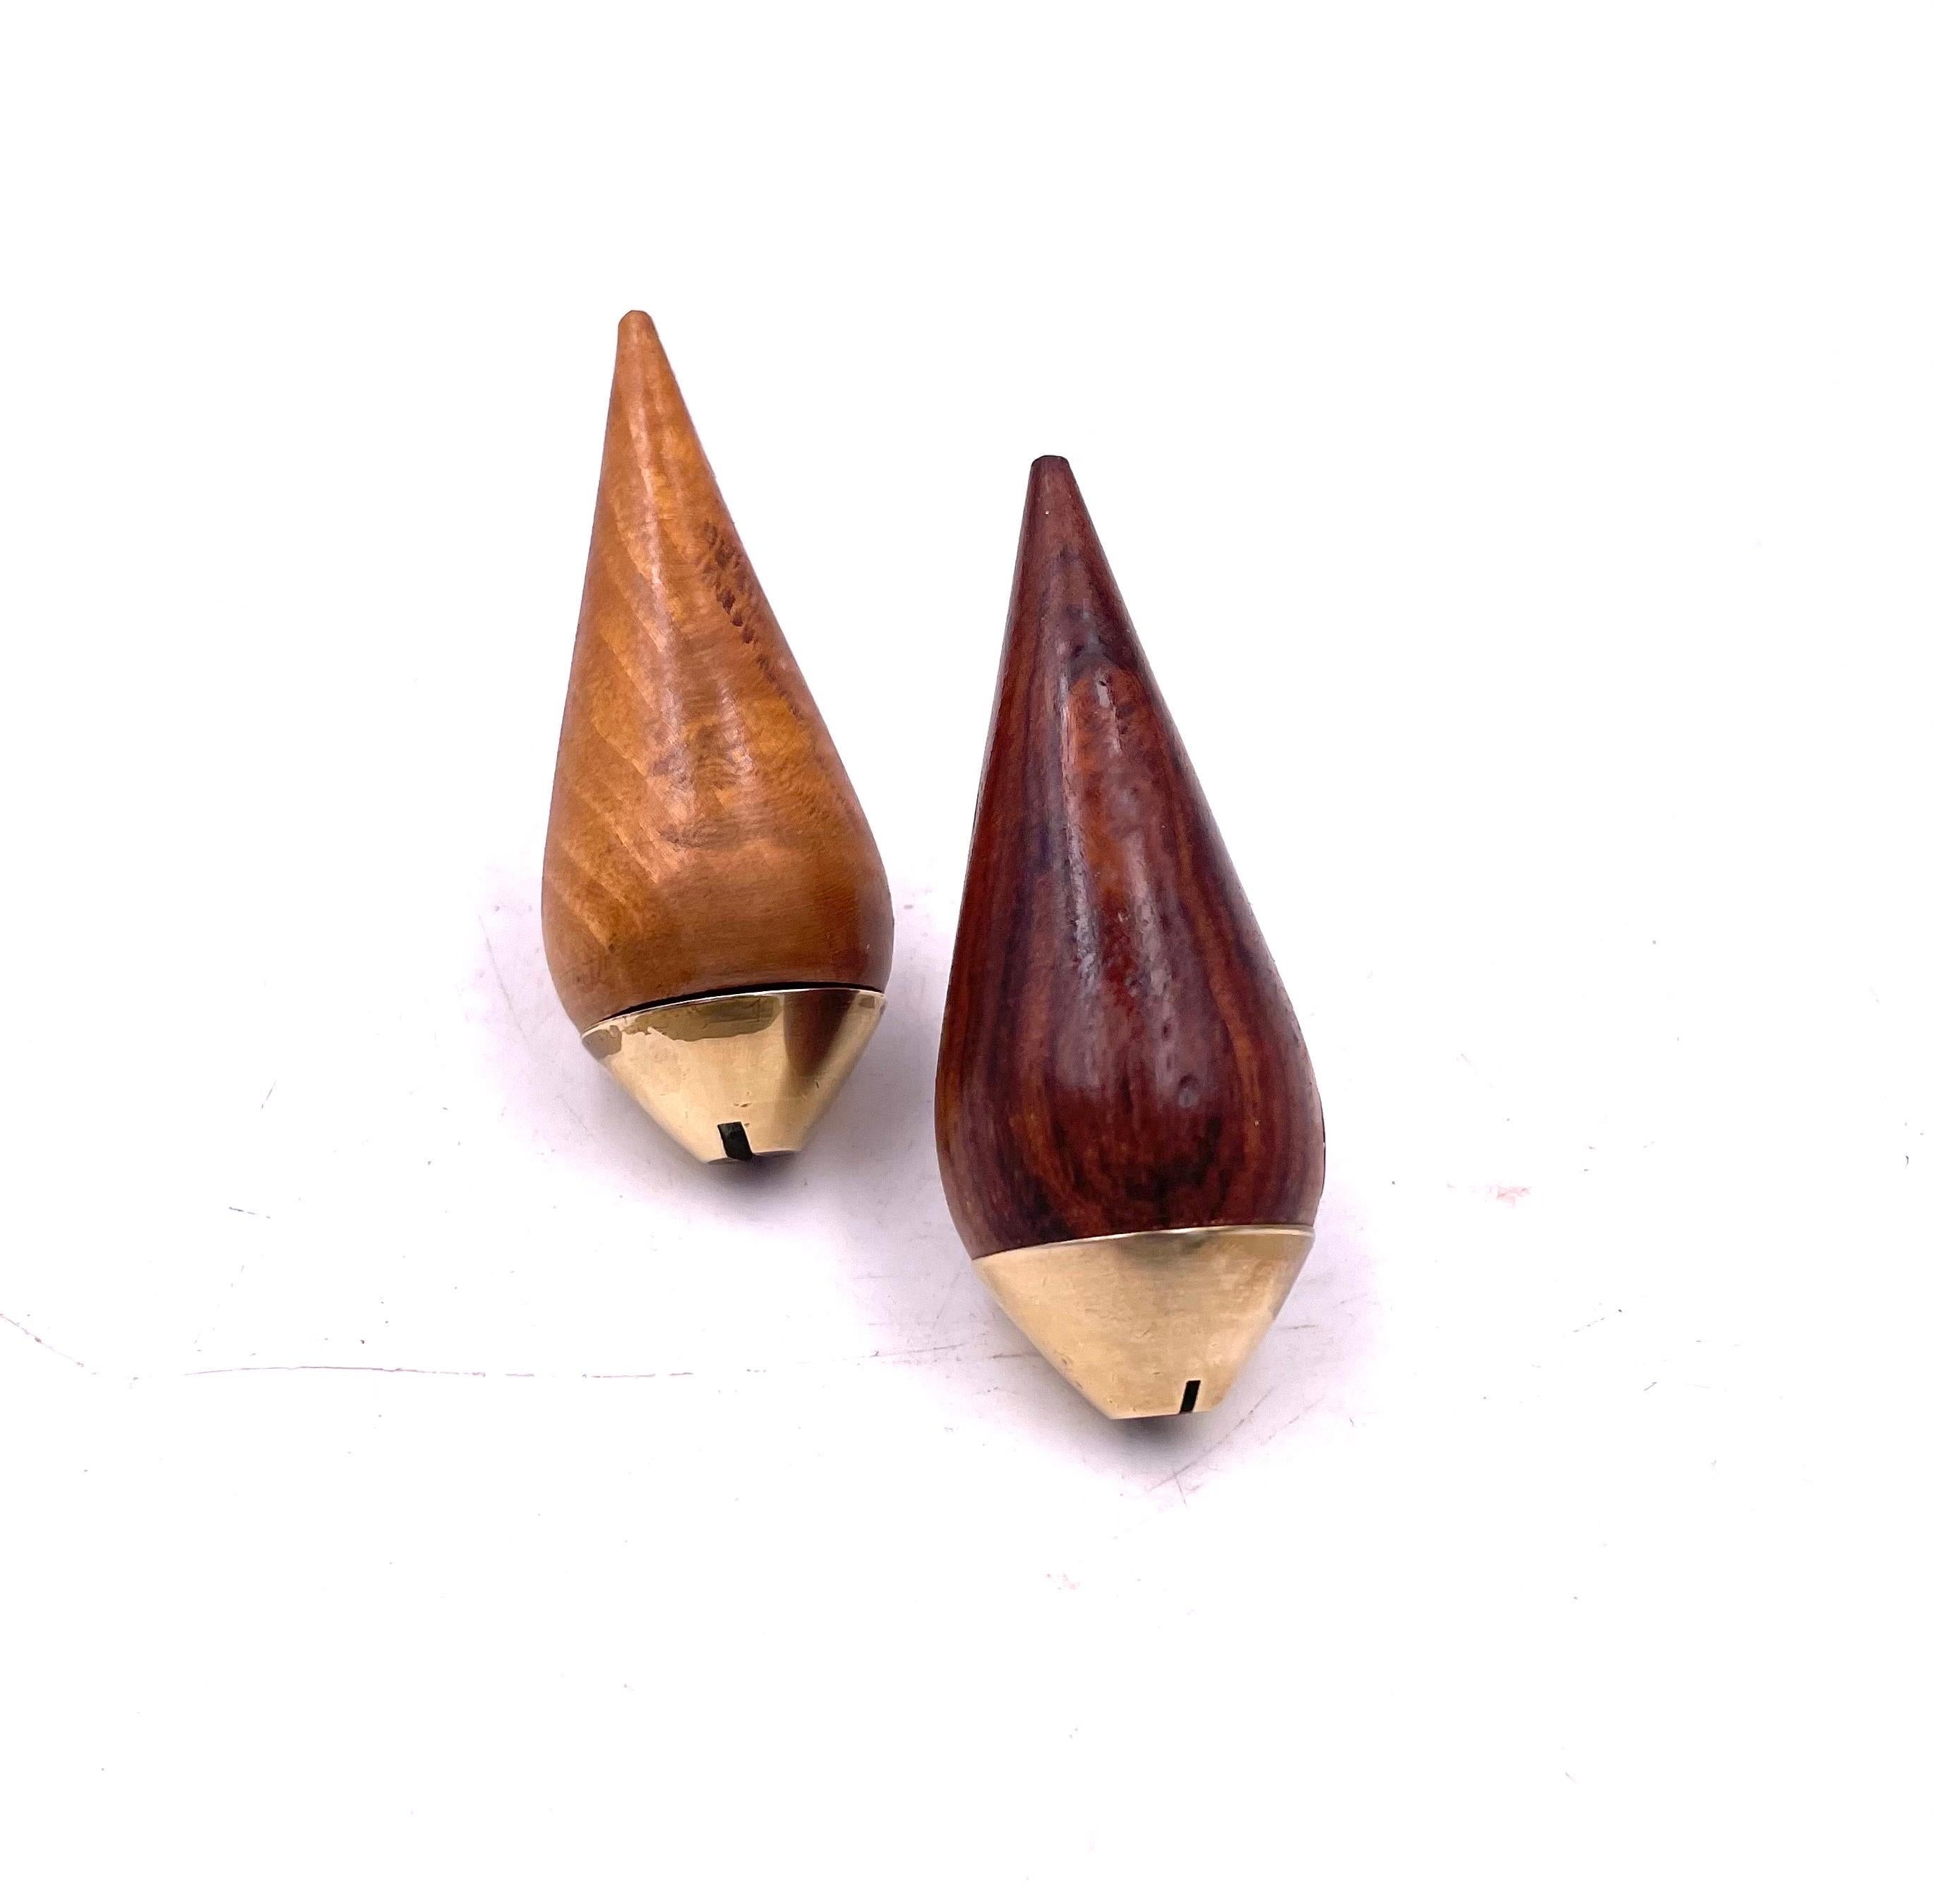 Danish Modern Rare Pair of Salt & Pepper Shakers in Rosewood & Brass In Excellent Condition For Sale In San Diego, CA